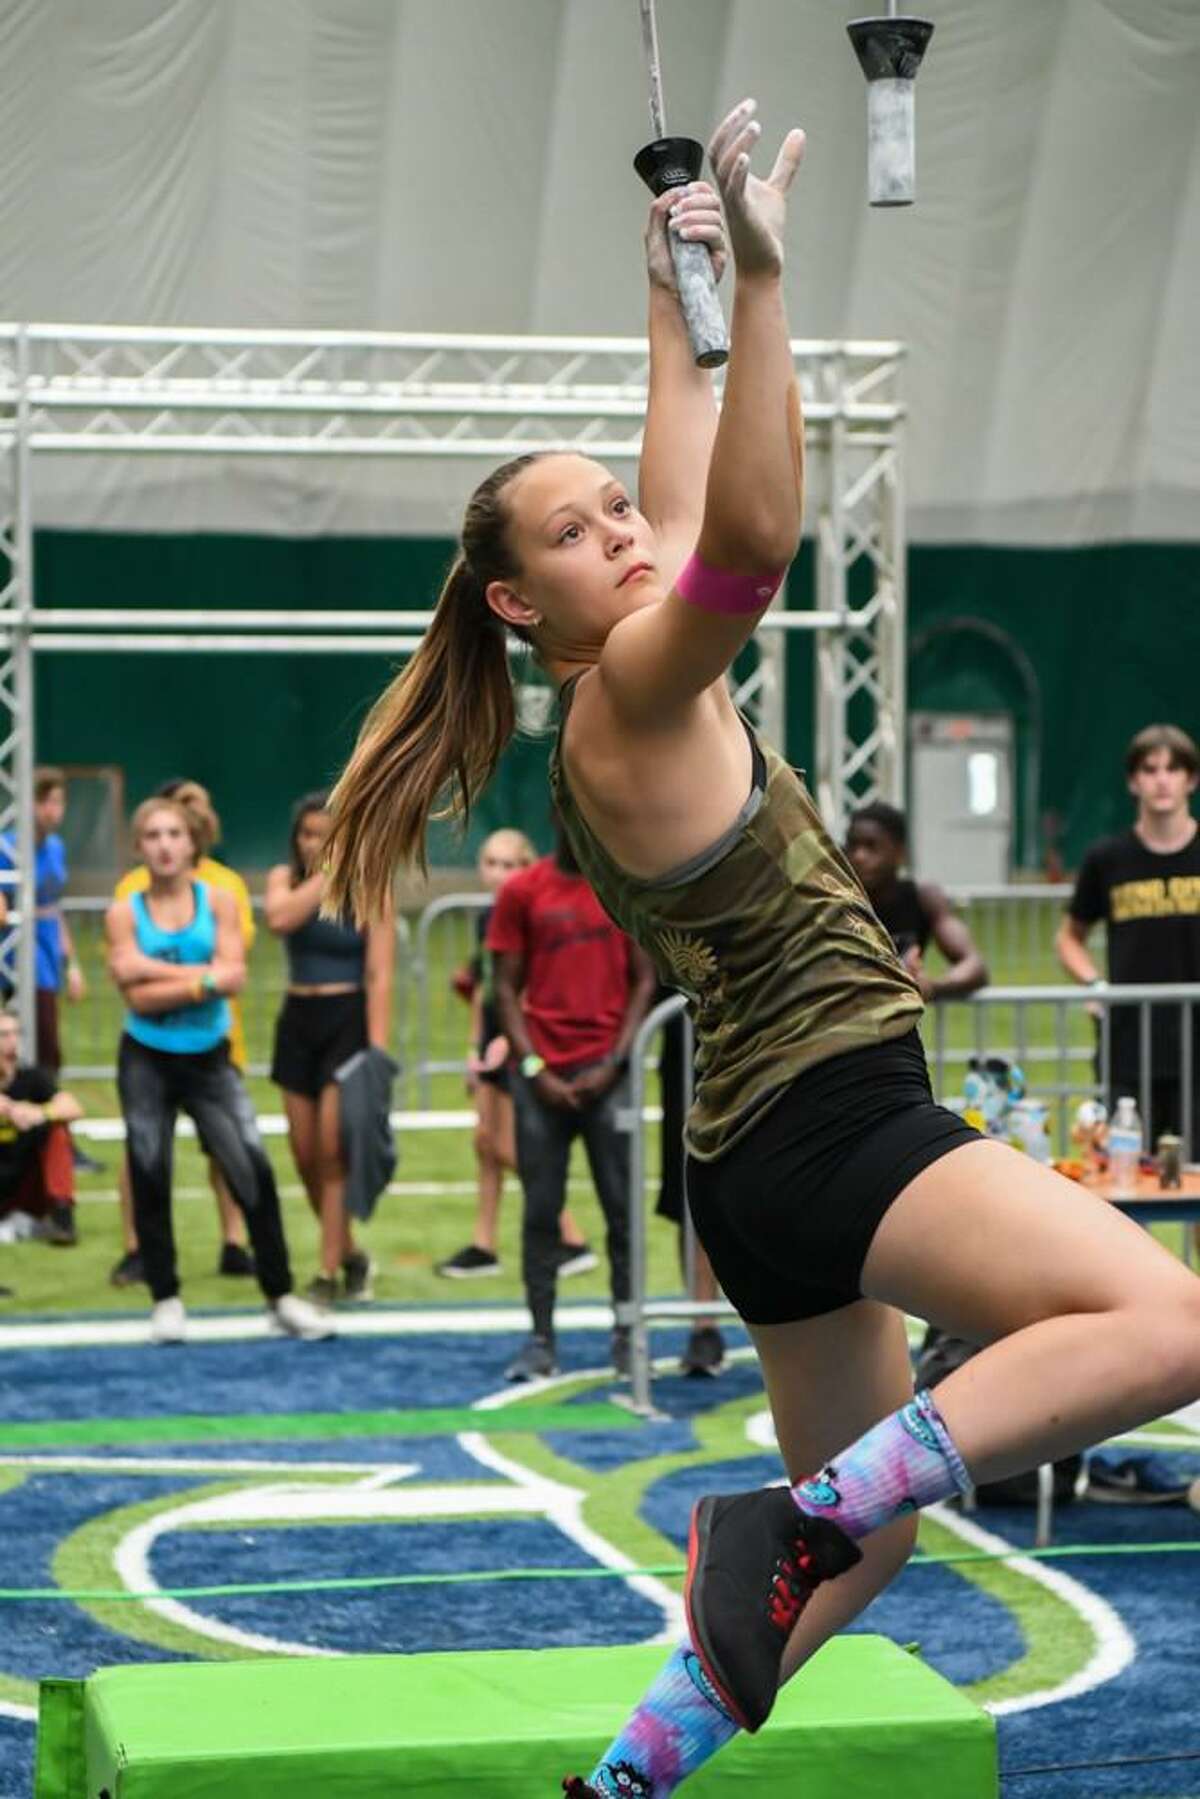 Easton teen Jordan Carr will again be competing on American Ninja Warrior Junior. She will be featured on the premiere episode Sept. 9, 2021, on NBC Peacock Network. Carr is pictured competing at this year's National Ninja League (NNL) World Championships.